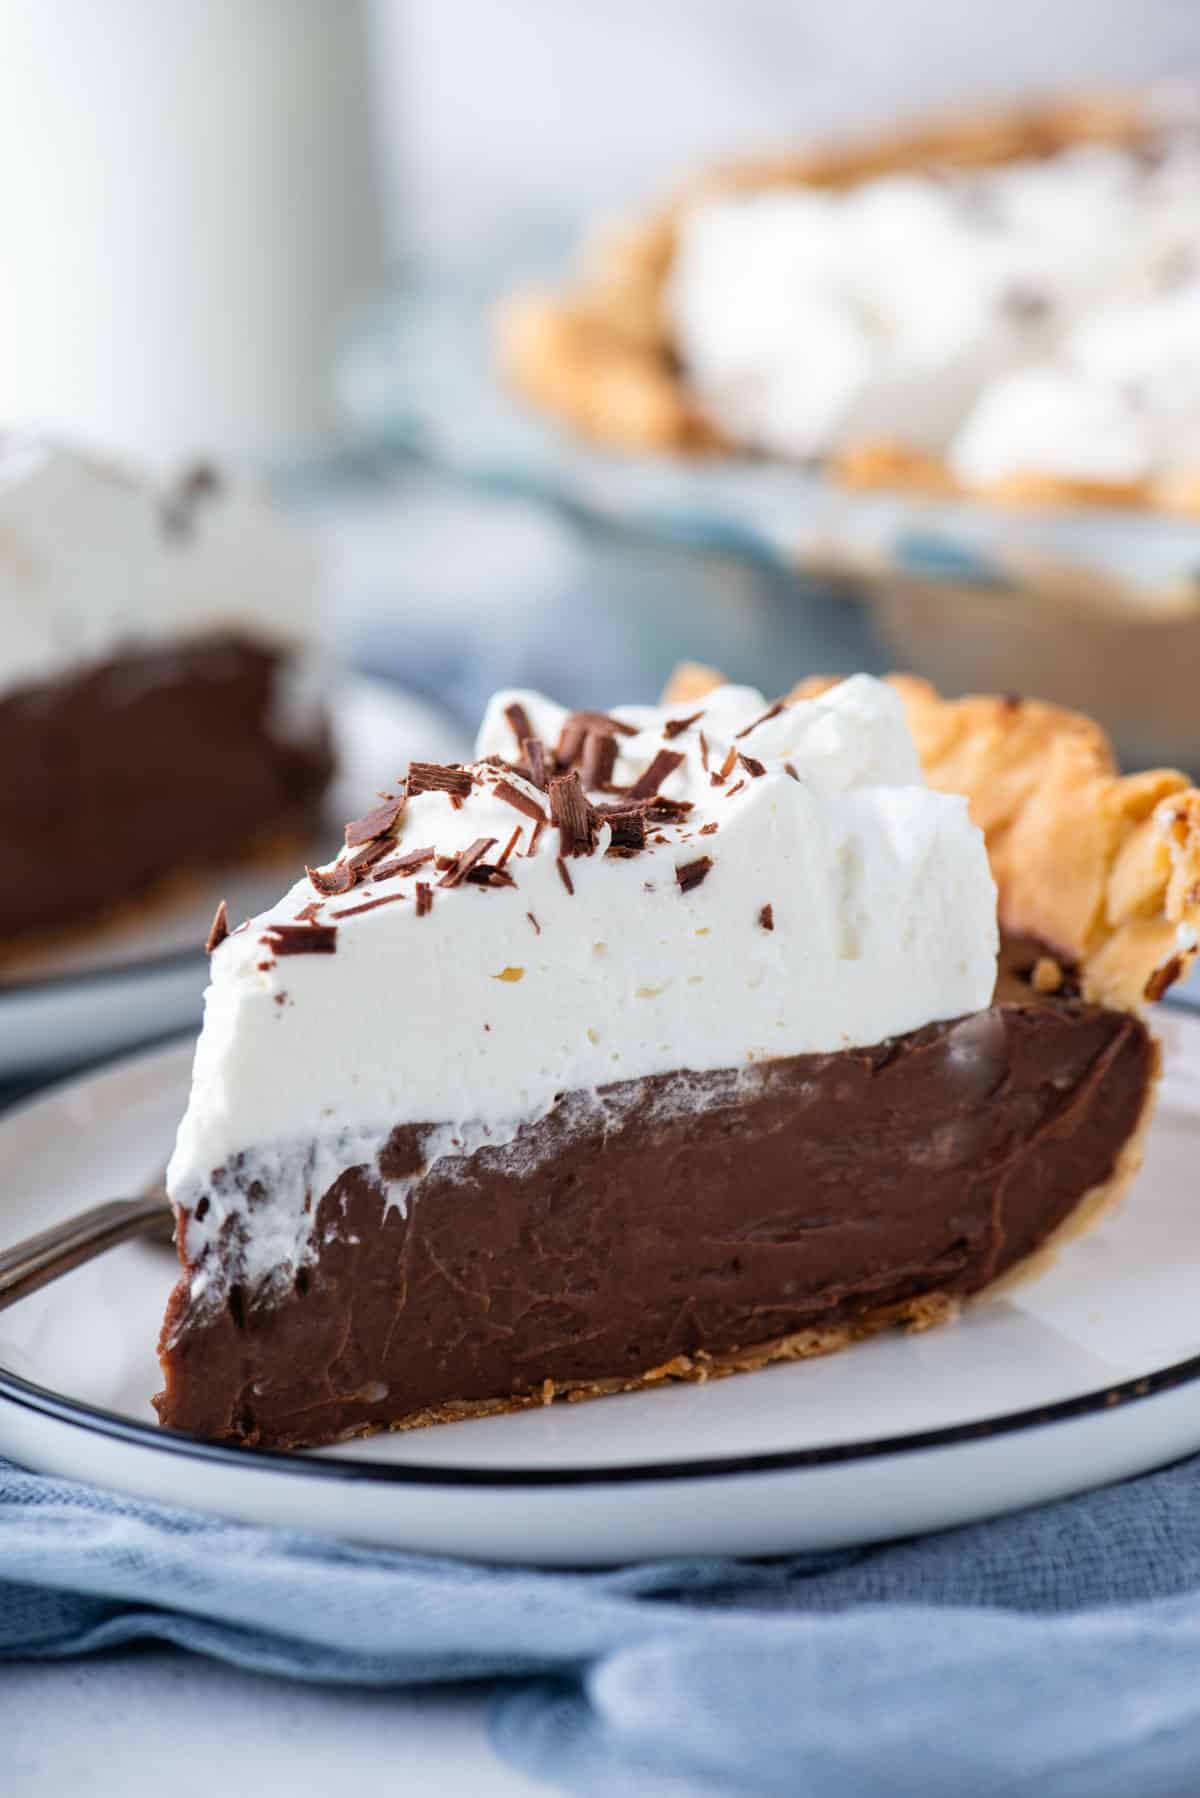 the side view of a slice of chocolate pie on a white plate sitting on a blue towel and more pie in the background